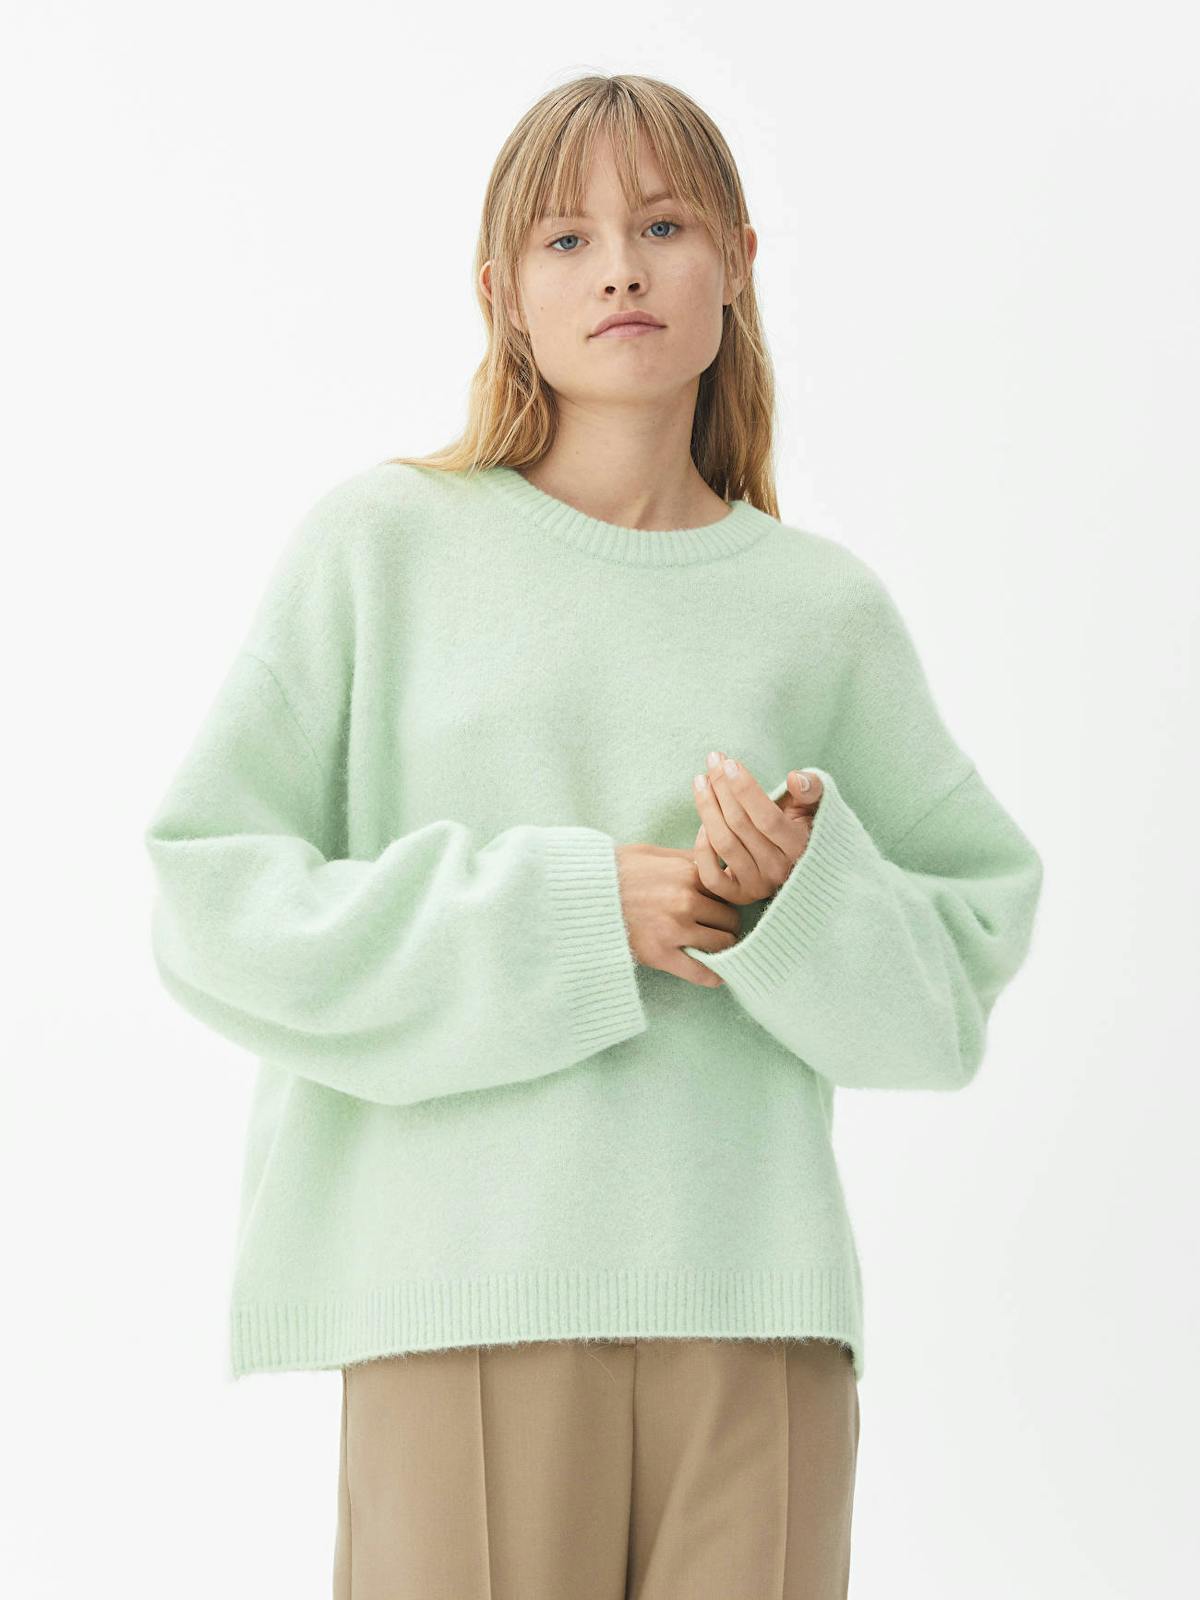 12 pastel jumpers to uplift your winter outfit